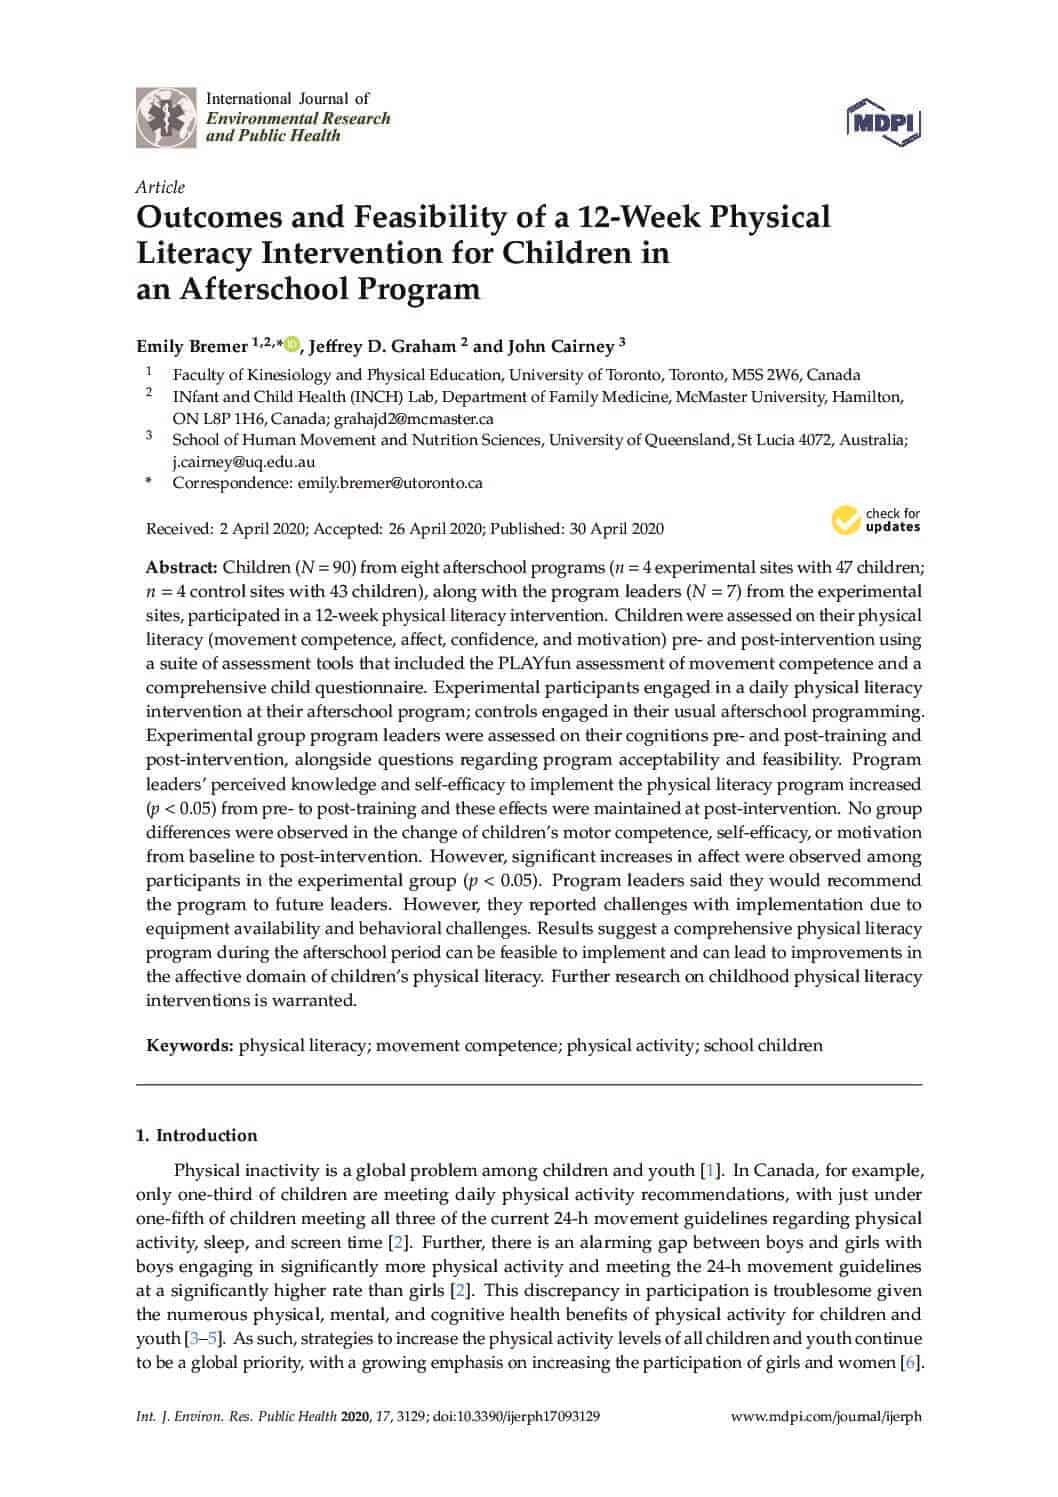 Outcomes and Feasibility of a 12-Week Physical Literacy Intervention for Children in an Afterschool Program